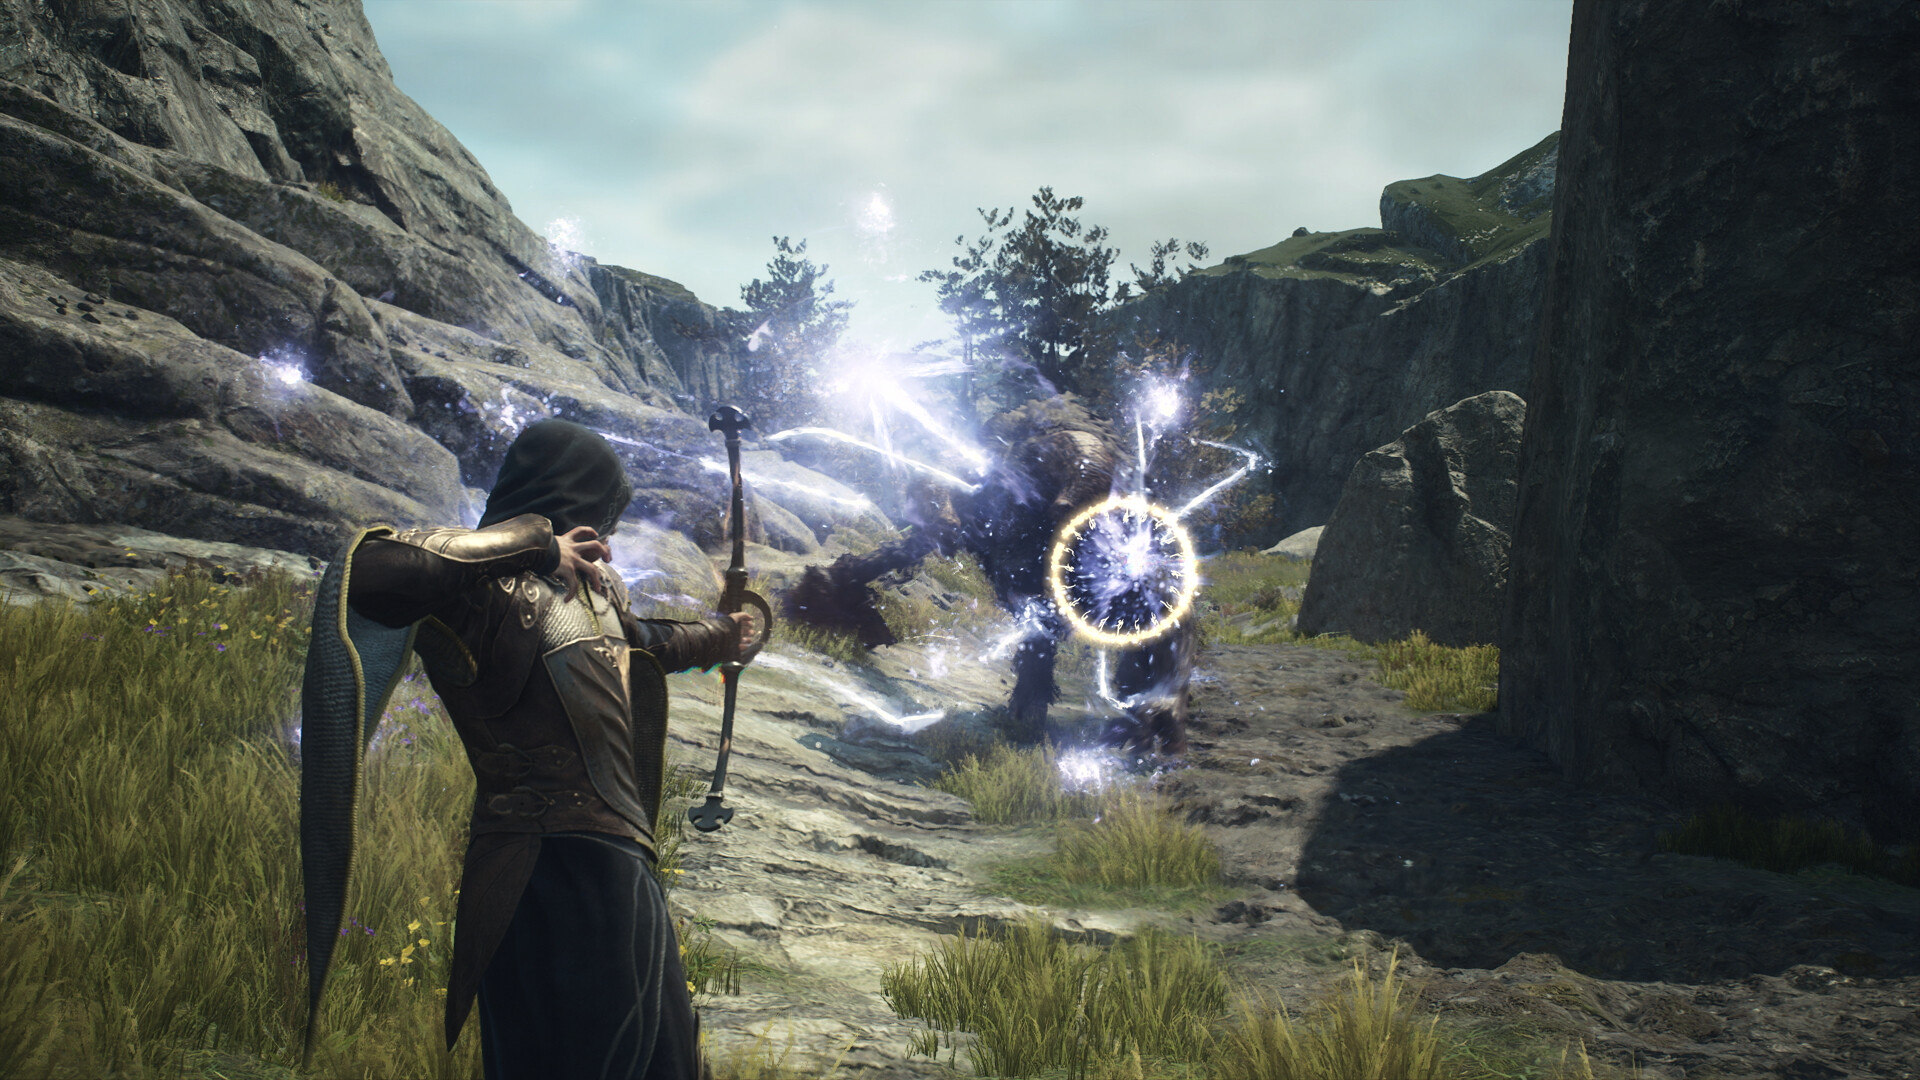 Dragon's Dogma 2: release date, price, and more